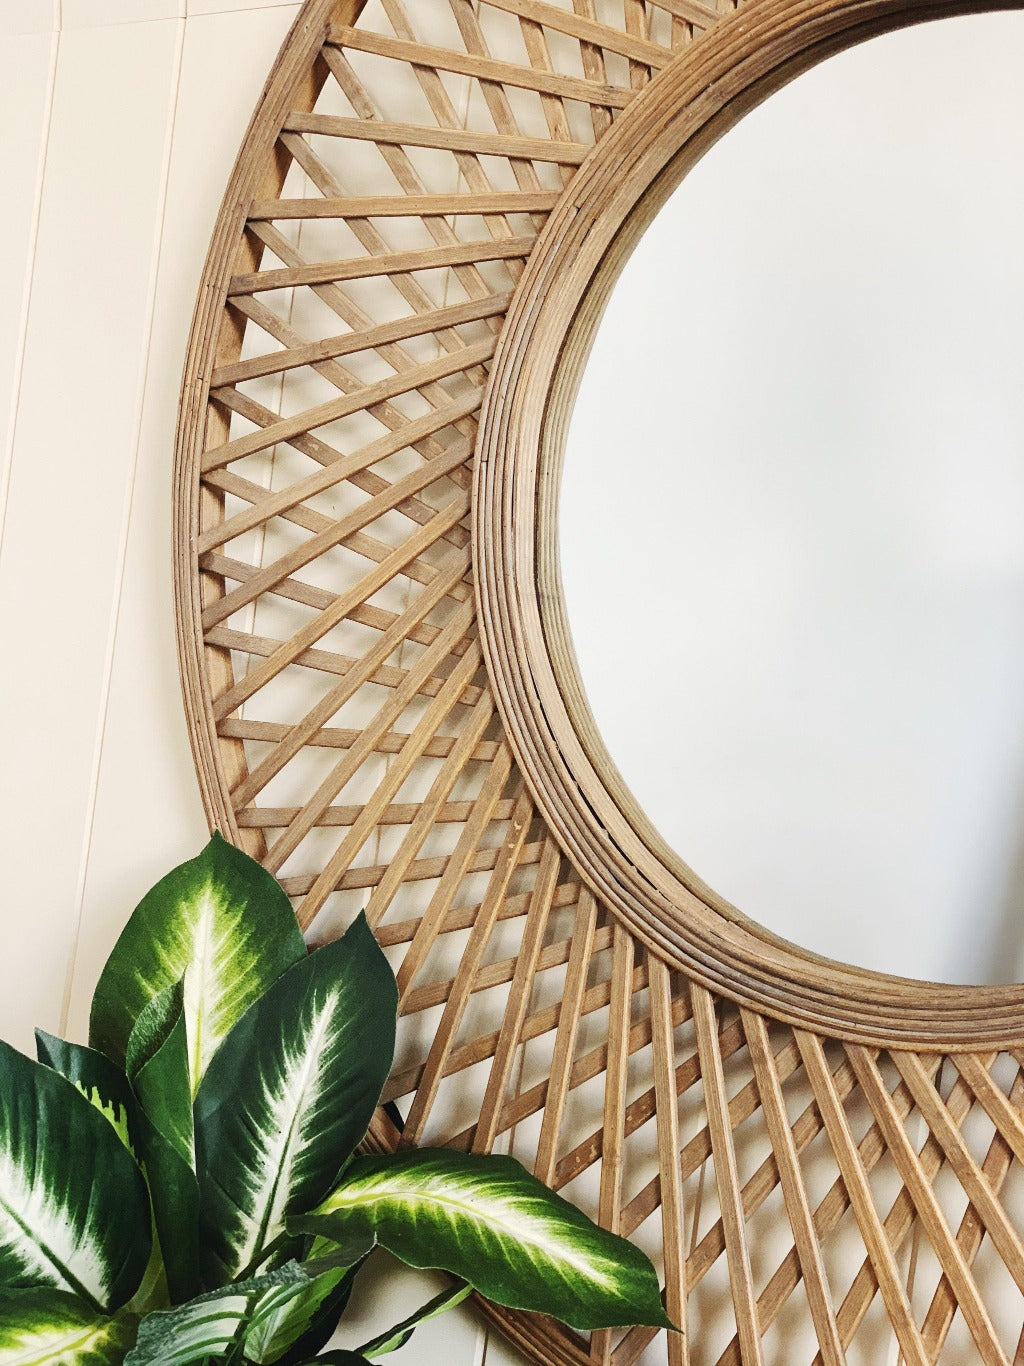 Mirrors - Rattan - Natural Oasis Round Rattan Mirror - 79cm |Bliss Gifts &amp; Homewares - Unit 8, 259 Princes Hwy Ulladulla - Shop Online &amp; In store - 0427795959, 44541523 - Australia wide shipping 